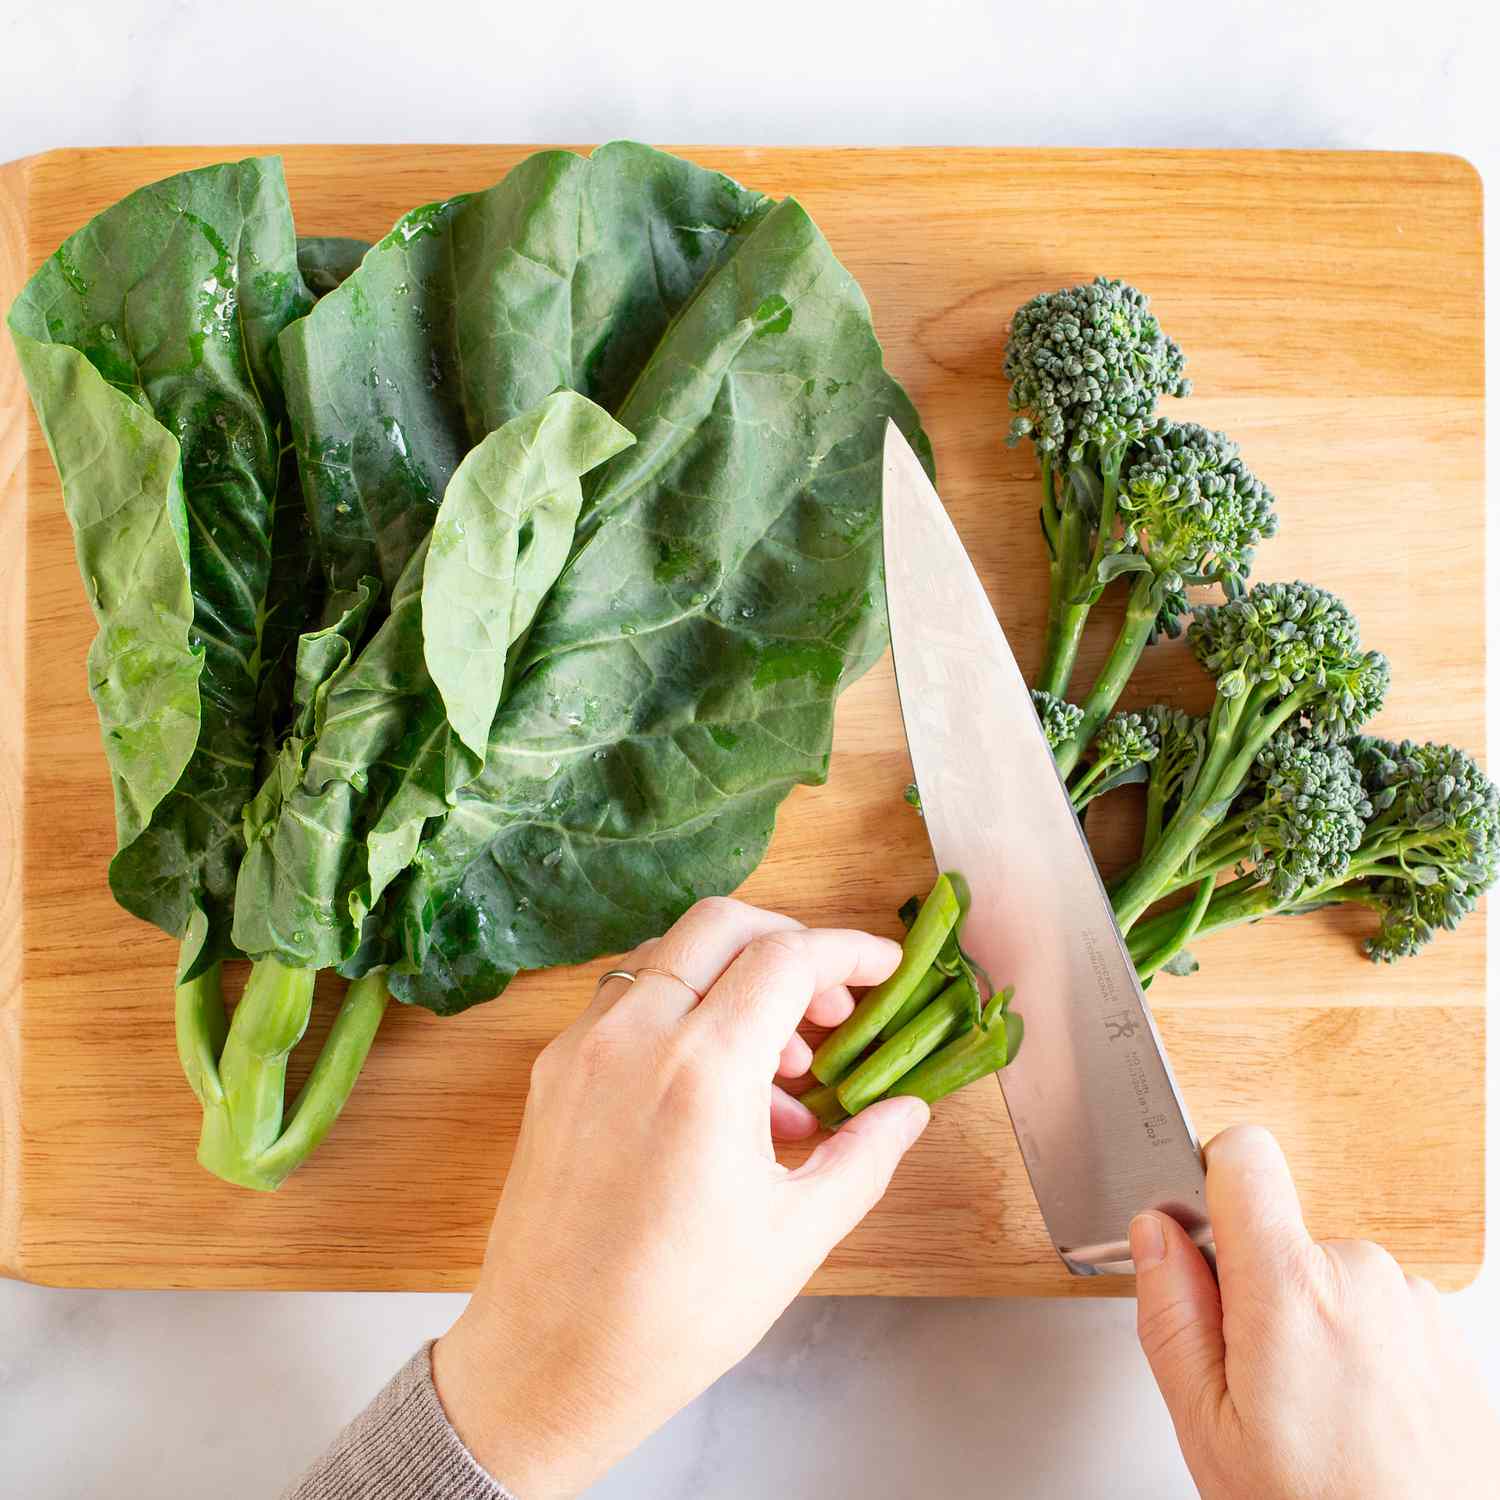 Chinese broccoli and broccoli rabe being cut on a cutting board